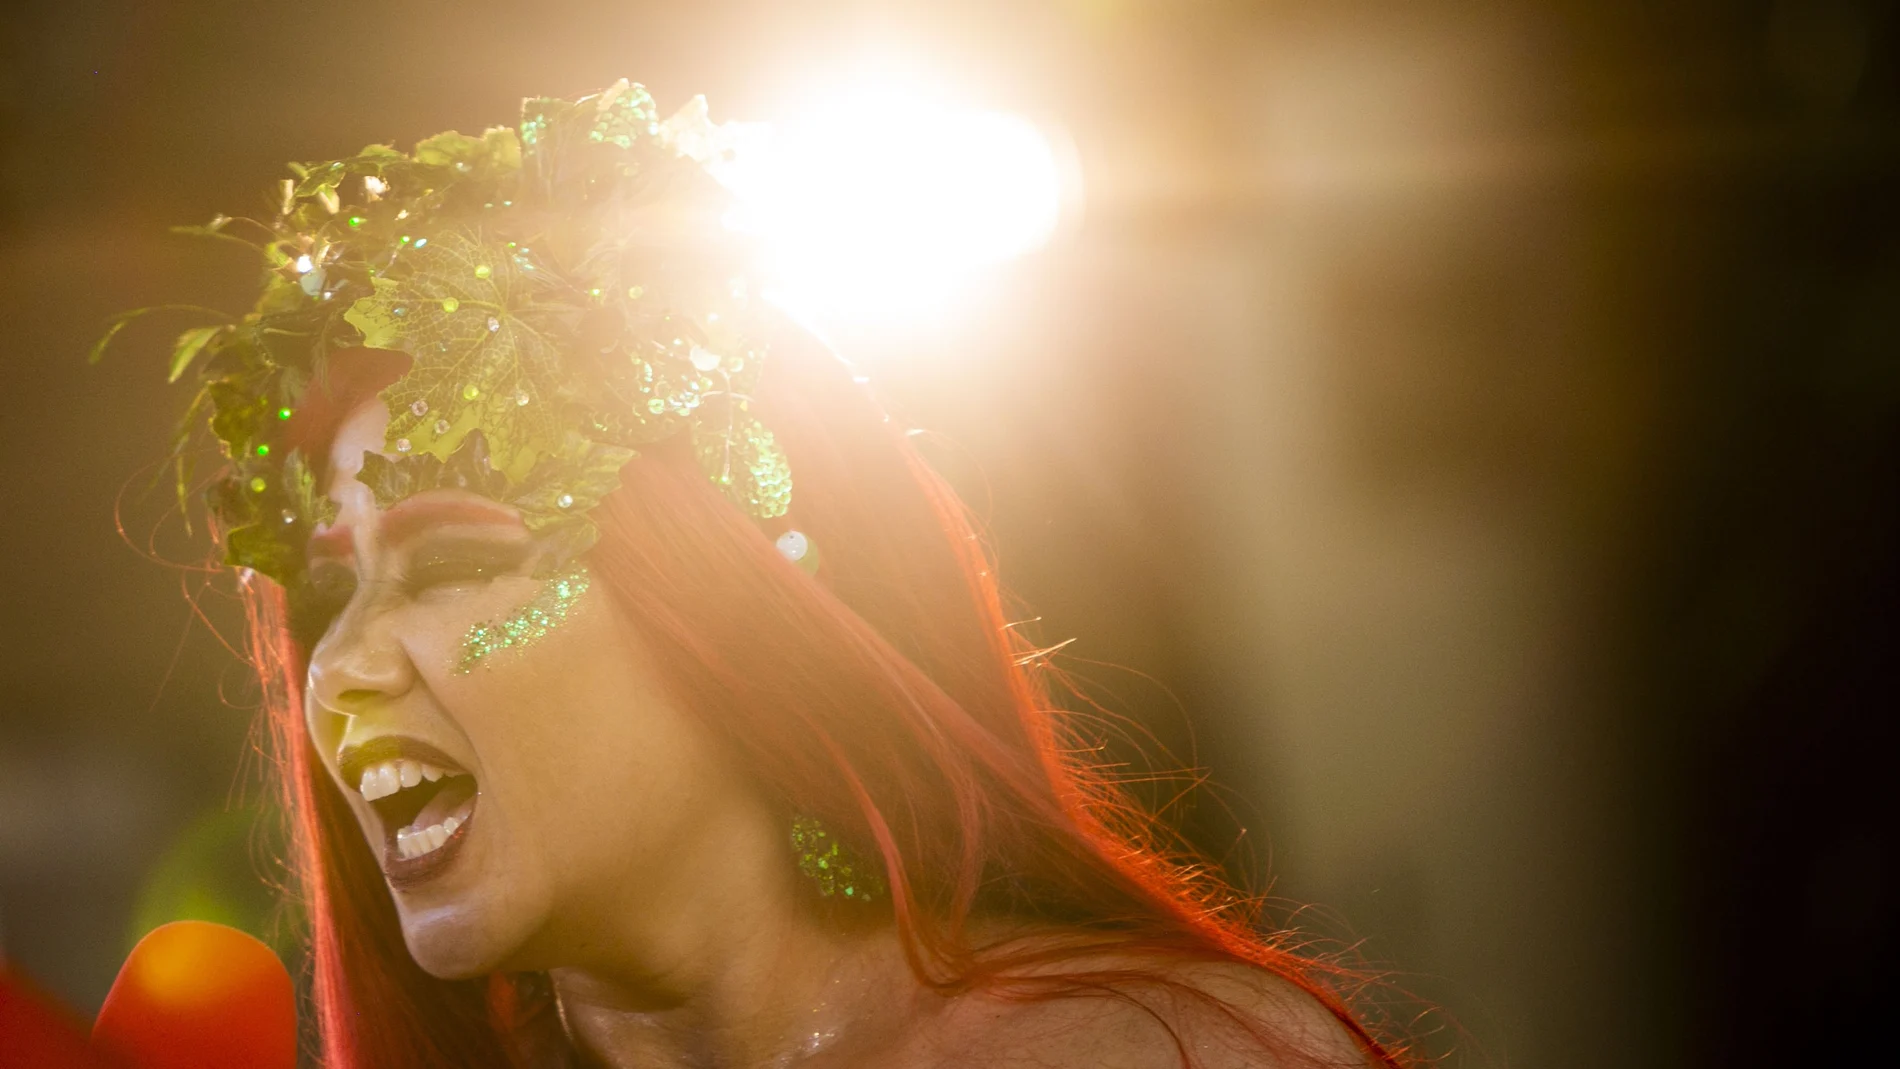 A woman performs in the "Desliga da Justica" block party in Rio de Janeiro, Brazil, Sunday, Feb. 14, 2021. The party was broadcast live on social media for those who were unable to participate in the carnival due to COVID restrictions after the city's government officially suspended Carnival and banned street parades or clandestine parties. (AP Photo/Bruna Prado)